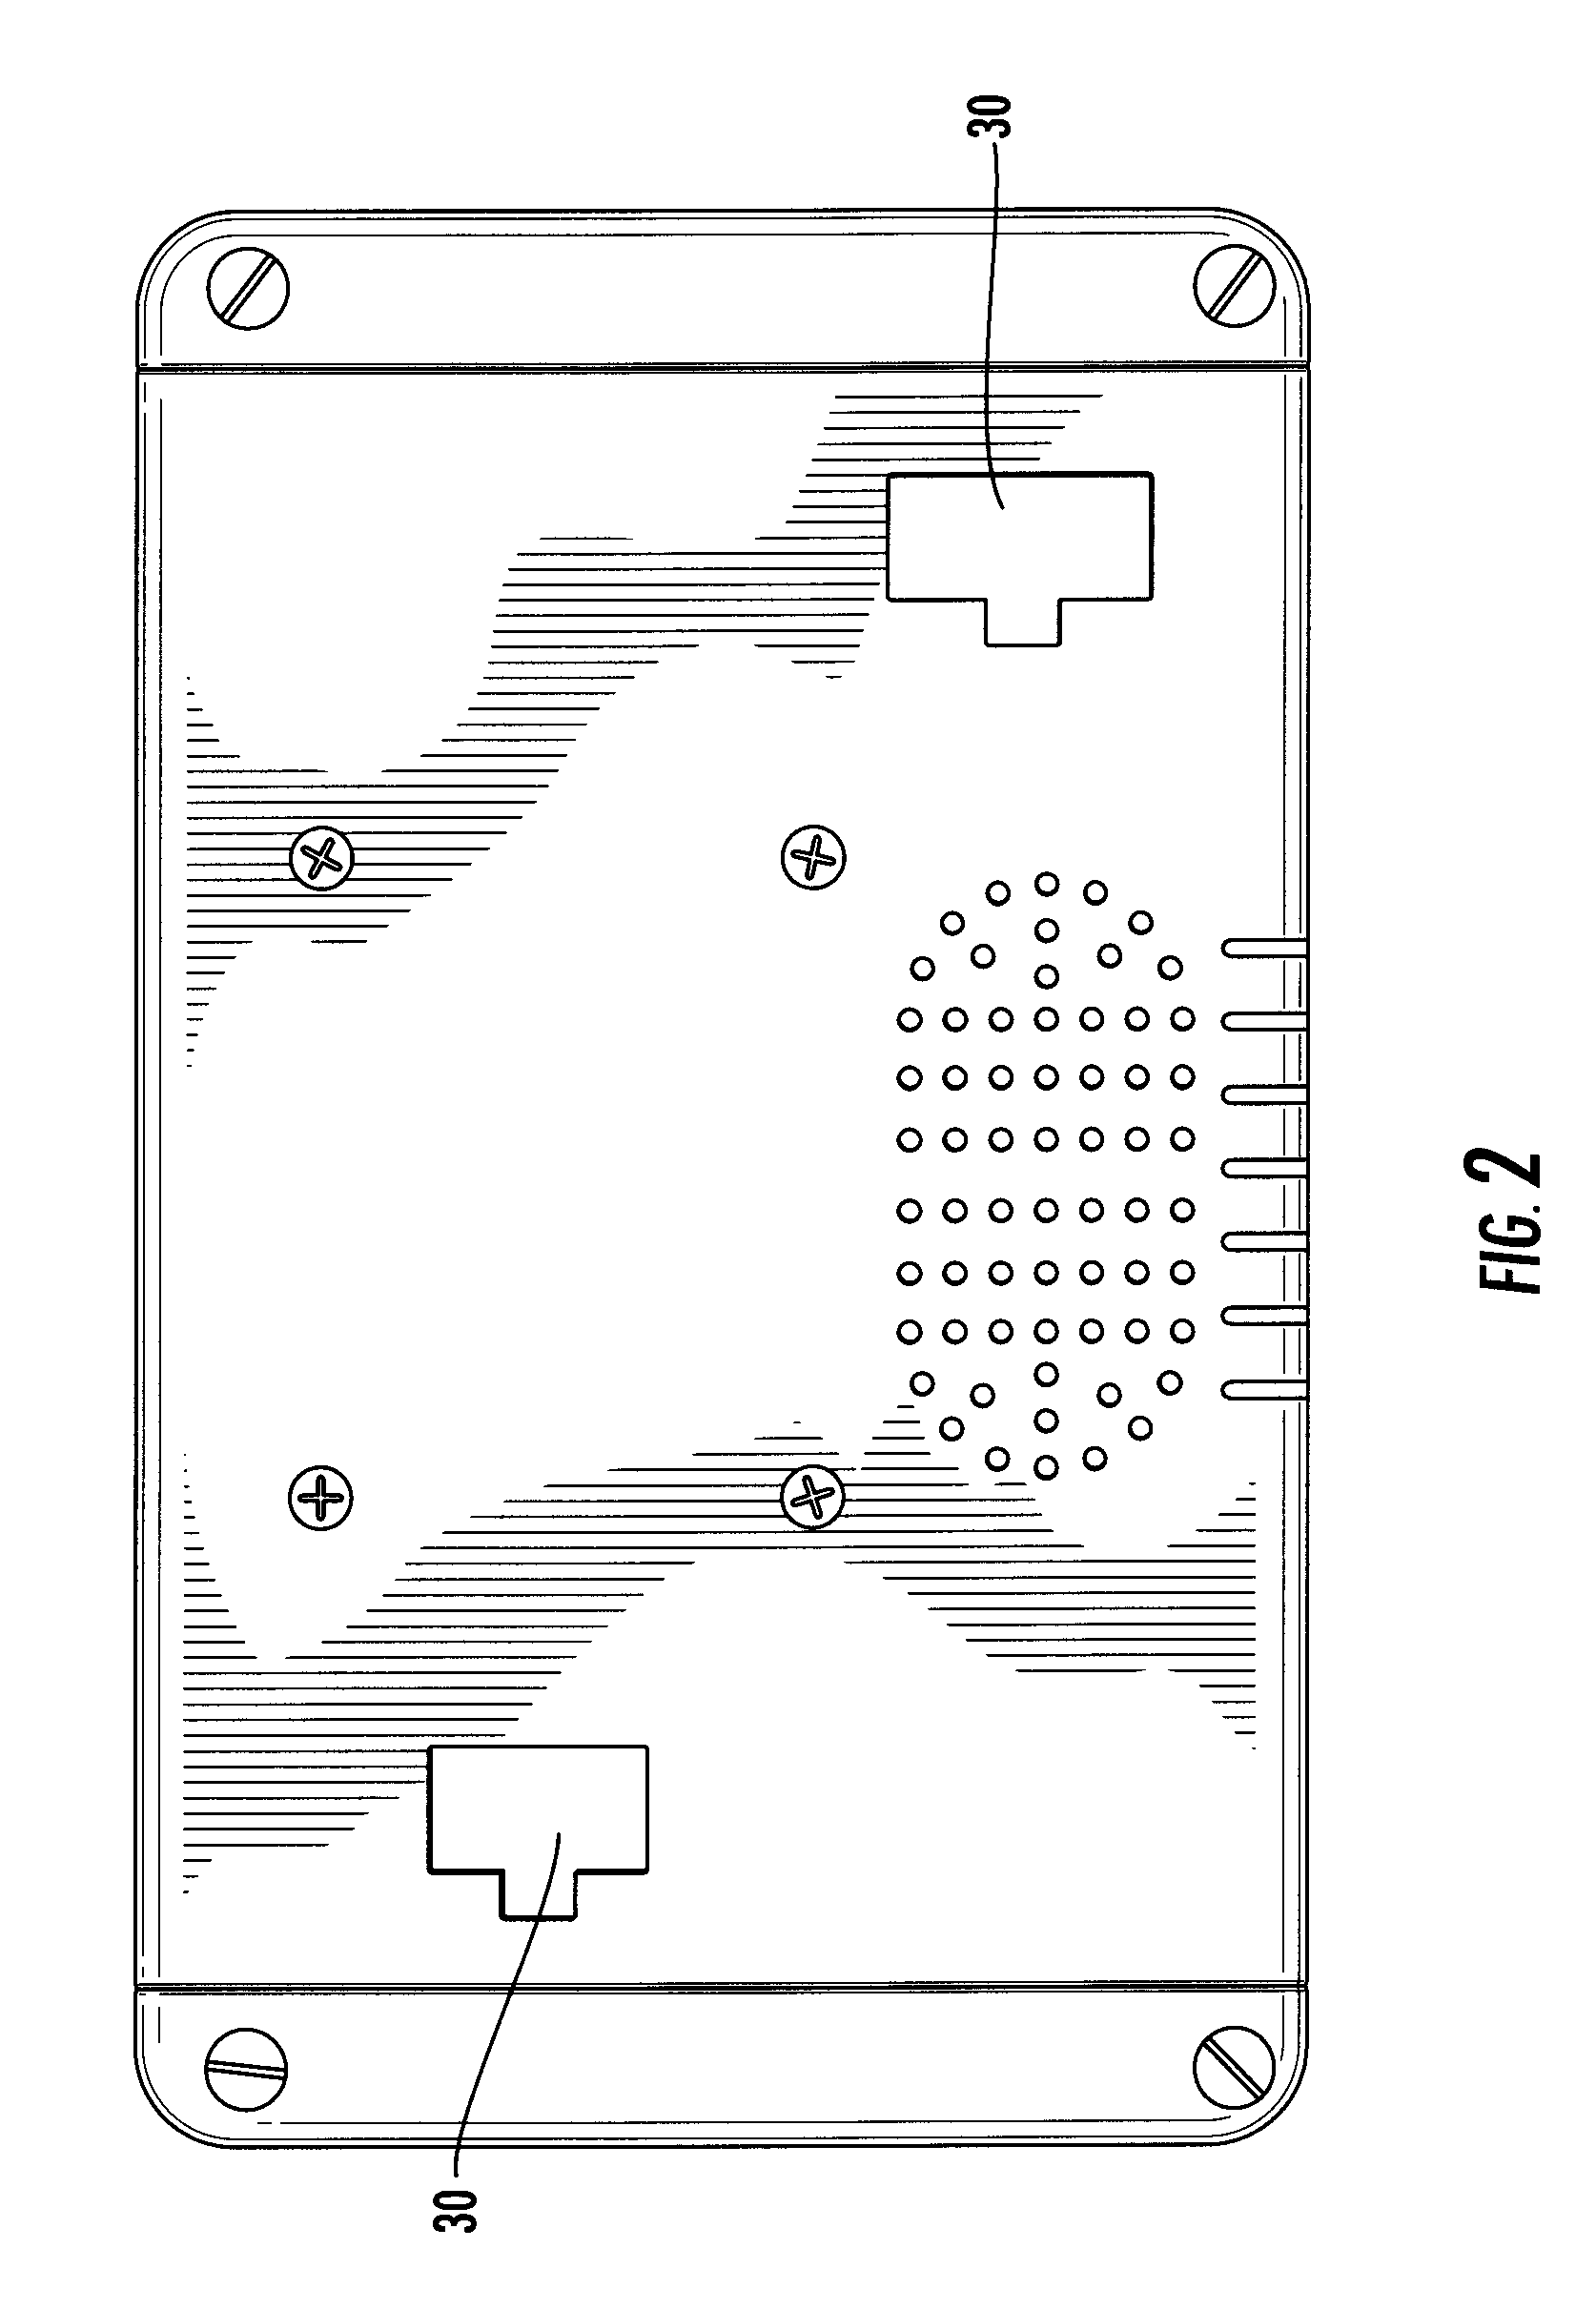 Data acquisition and display system for motor vehicles